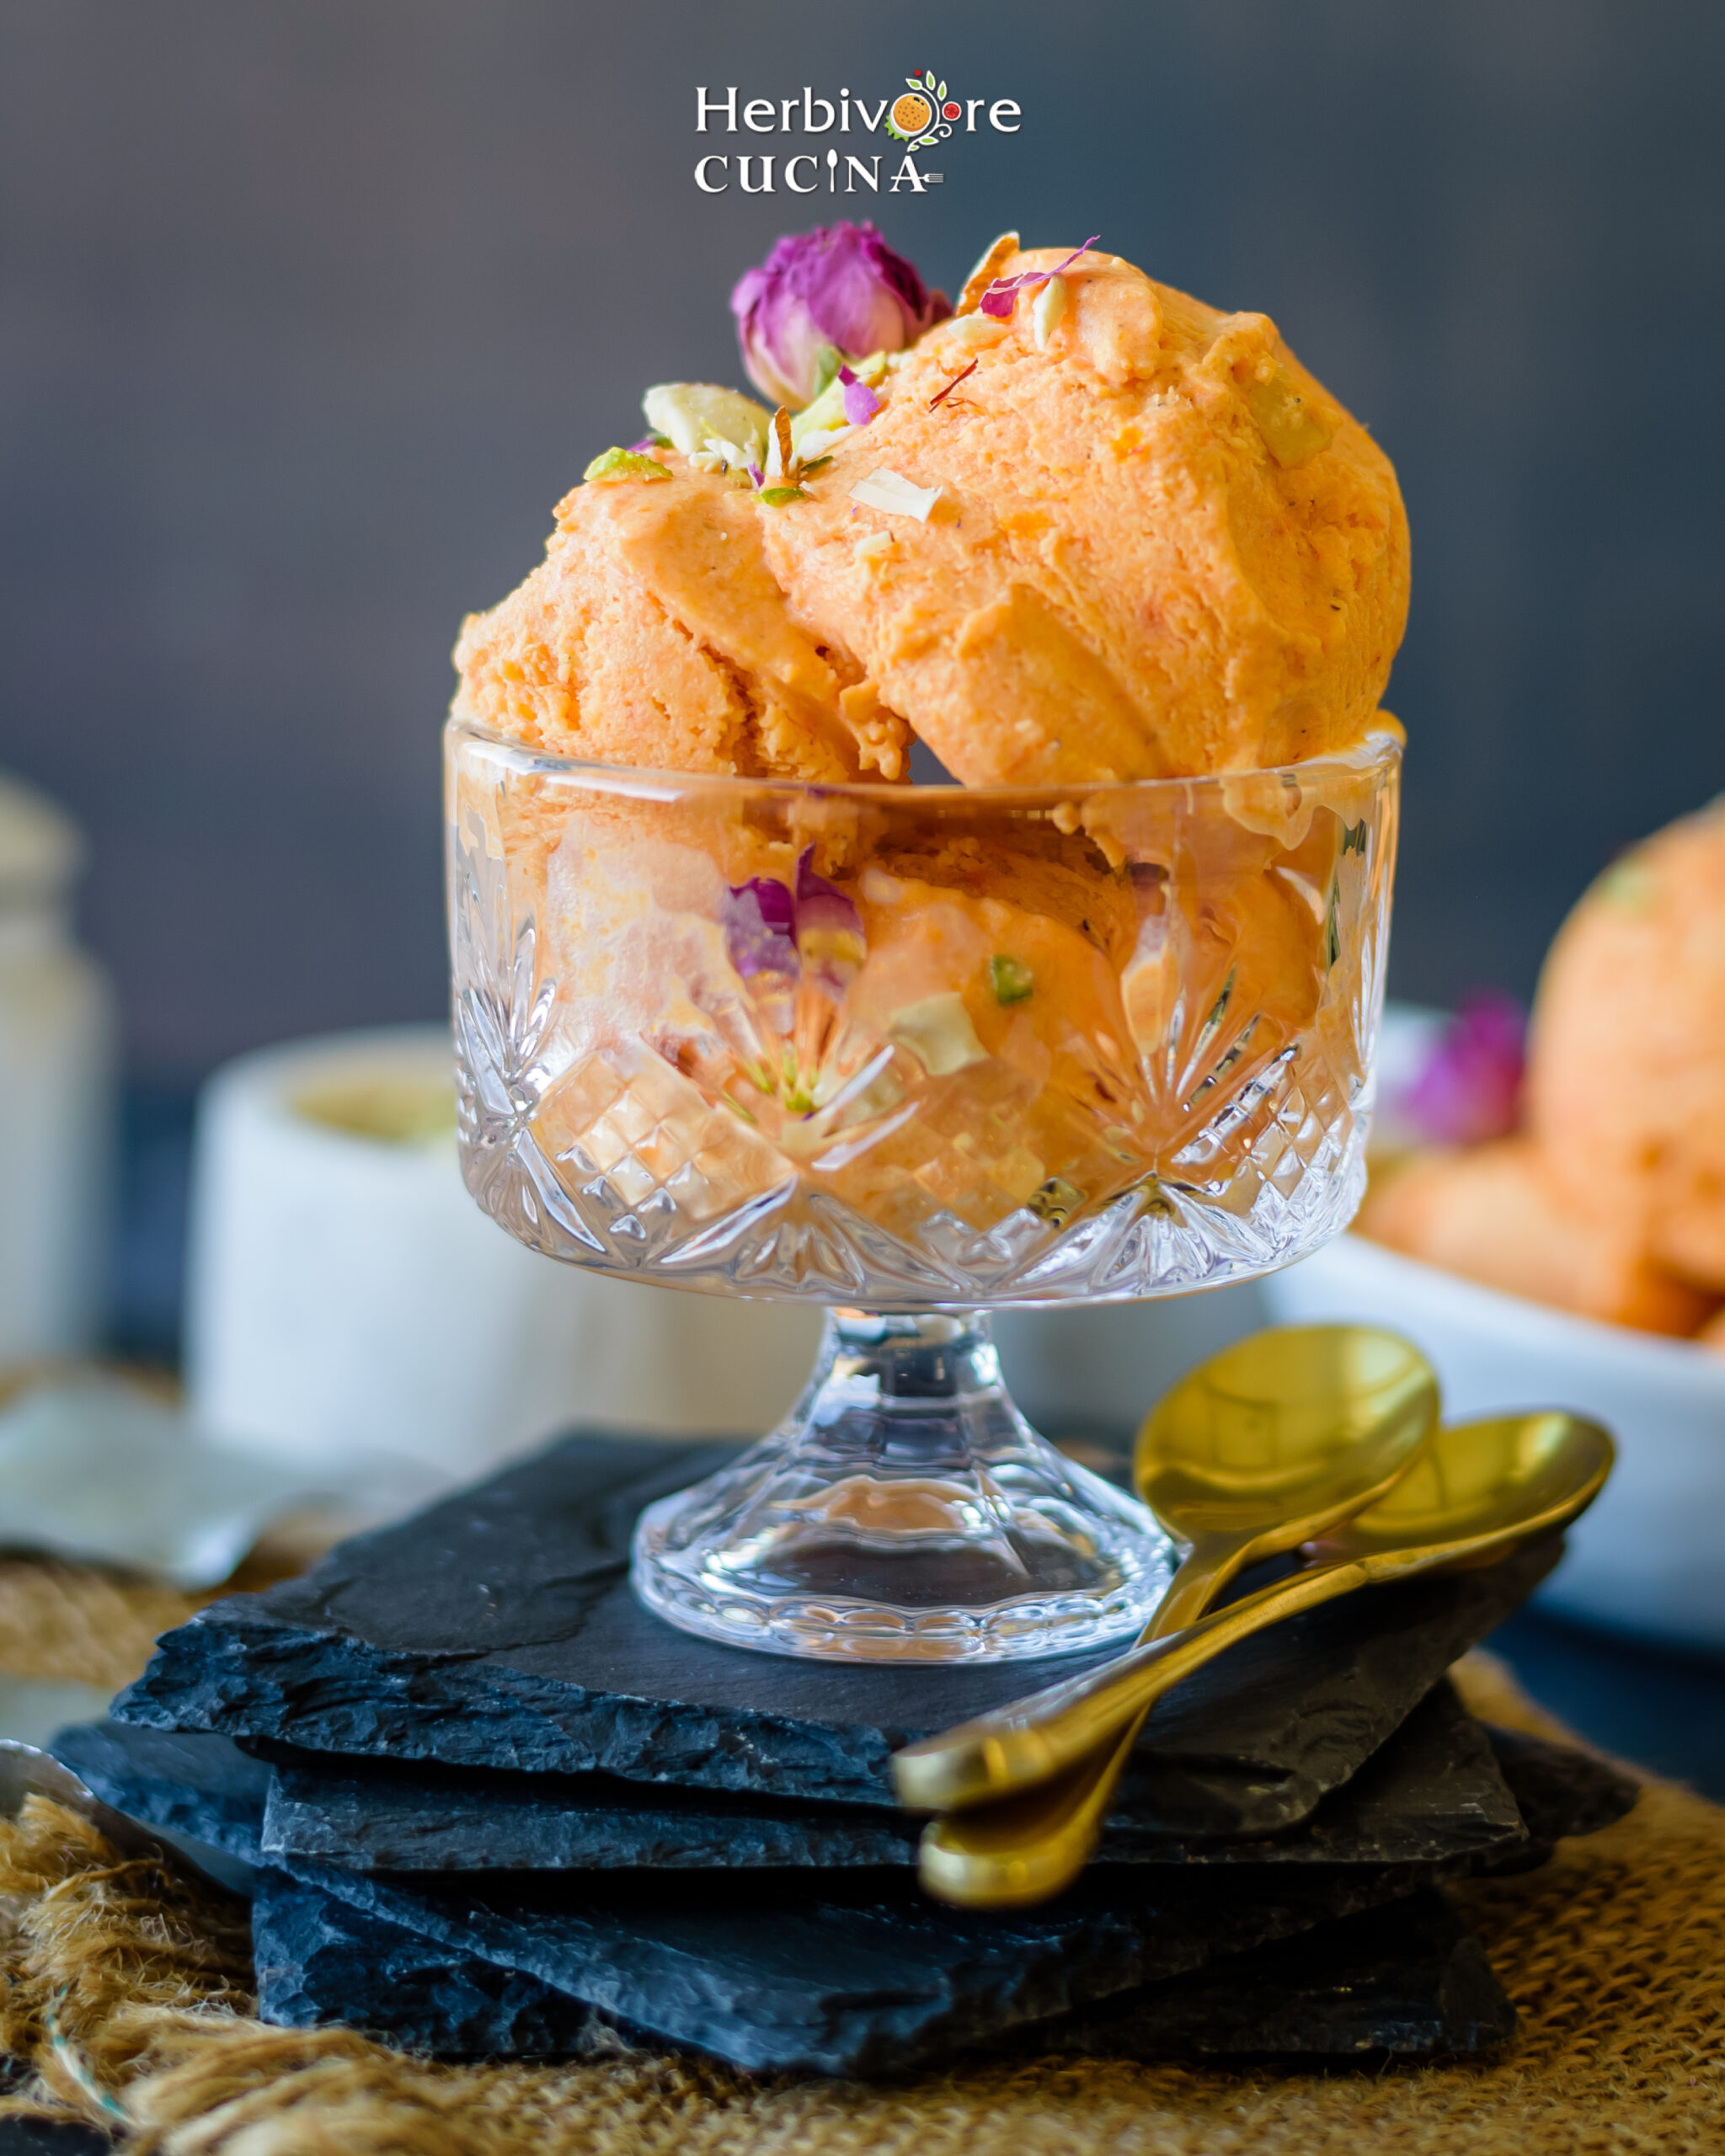 Front view of 3 scoops of gajar halwa ice cream in a clear bowl on a black slate plate on a dark background. 